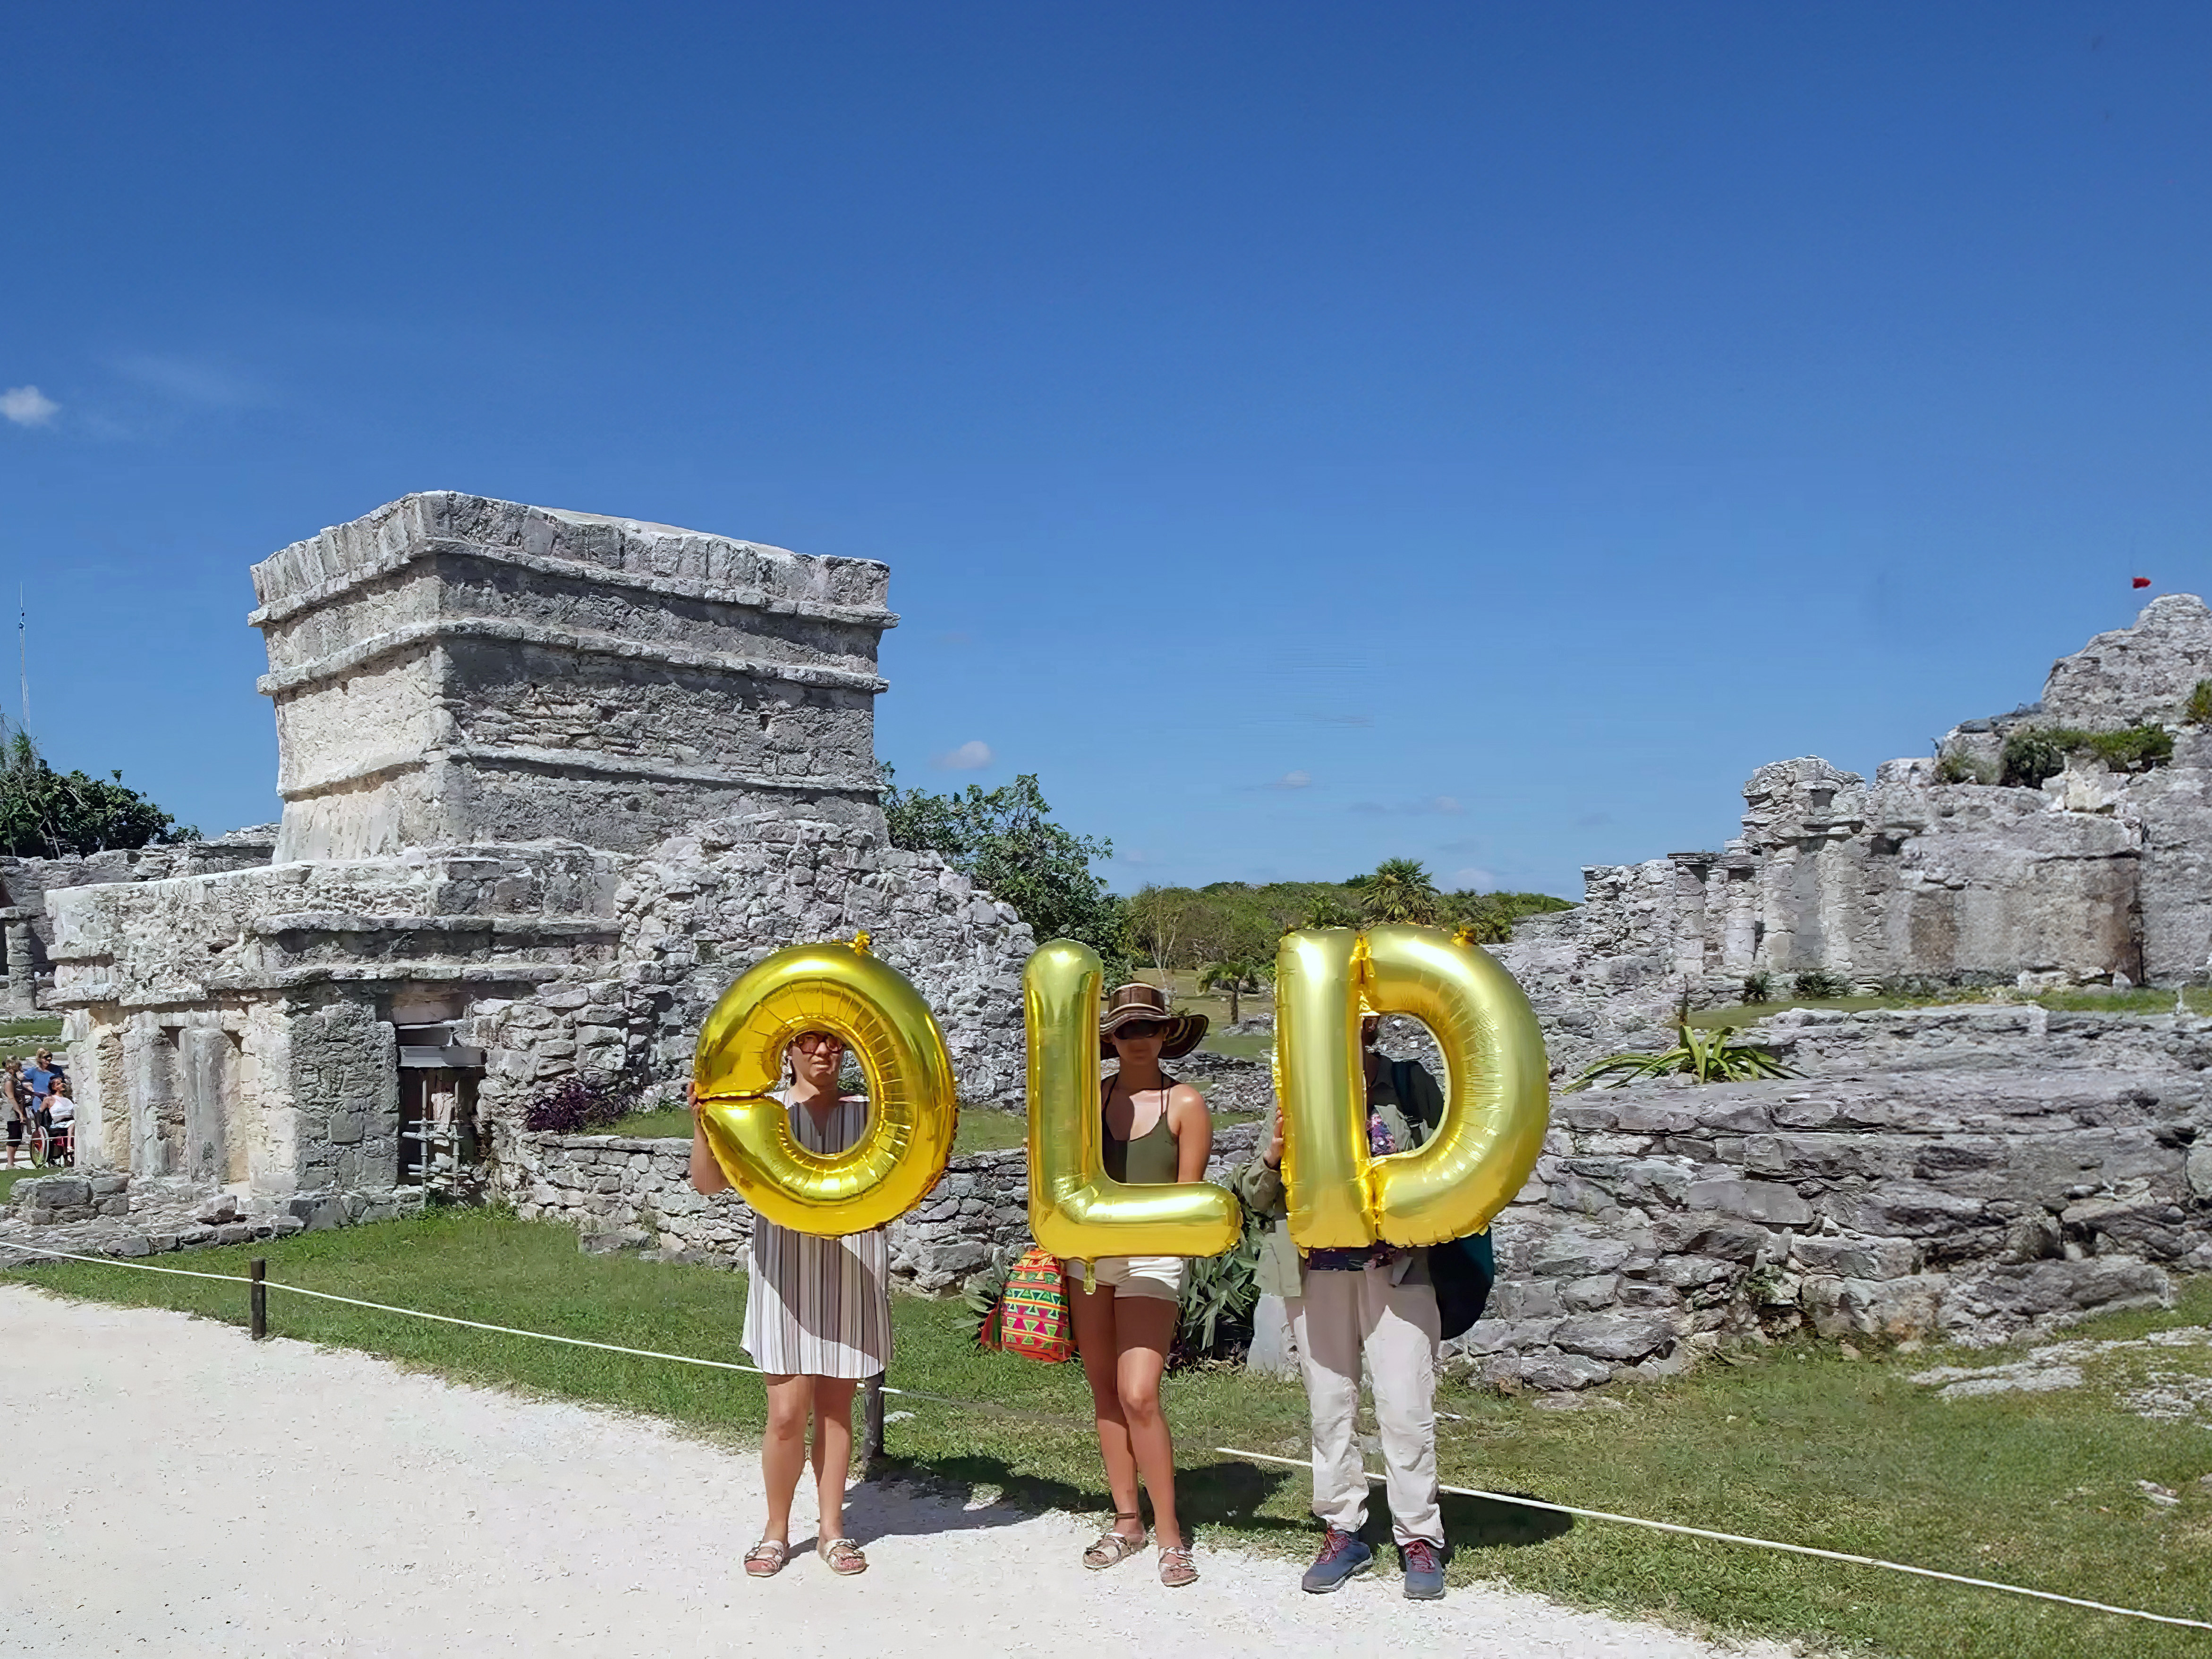 Mexico, Tulum, Temple of the Frescoes - Old, Silence was Golden, gold balloons